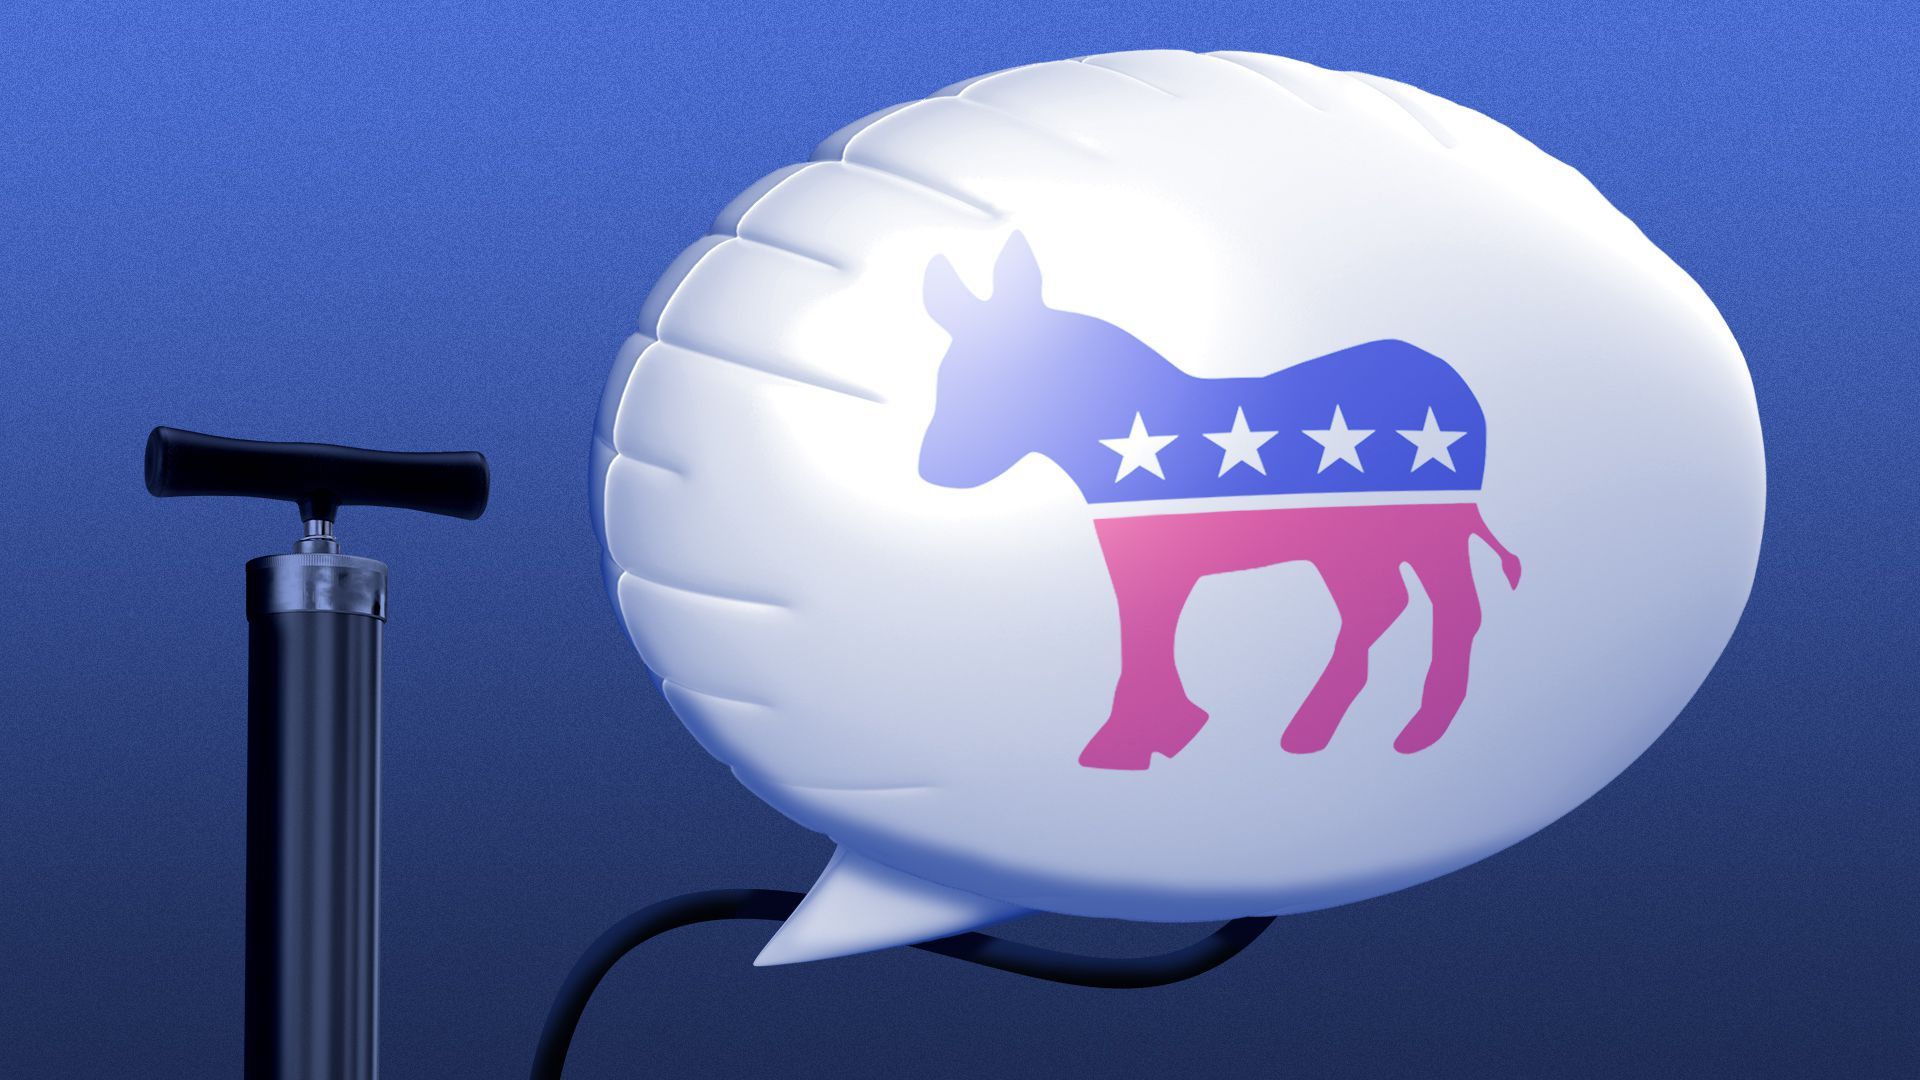 Illustration of a bike pump pumping up a speech-bubble balloon with the Democratic Party donkey on it